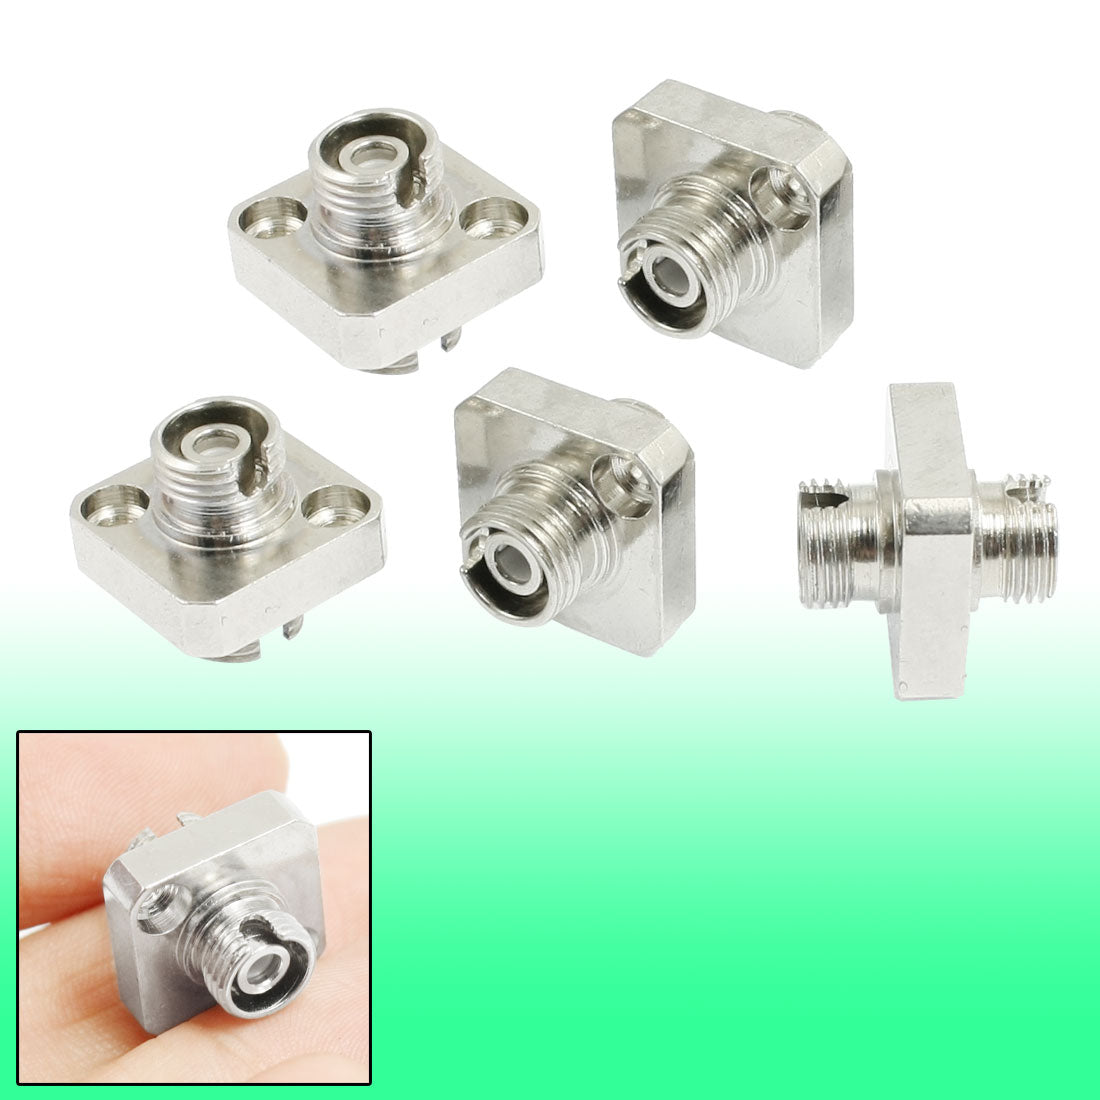 uxcell Uxcell 5 Pcs Fiber Optic Mating Adapter FC Female to Female Connector